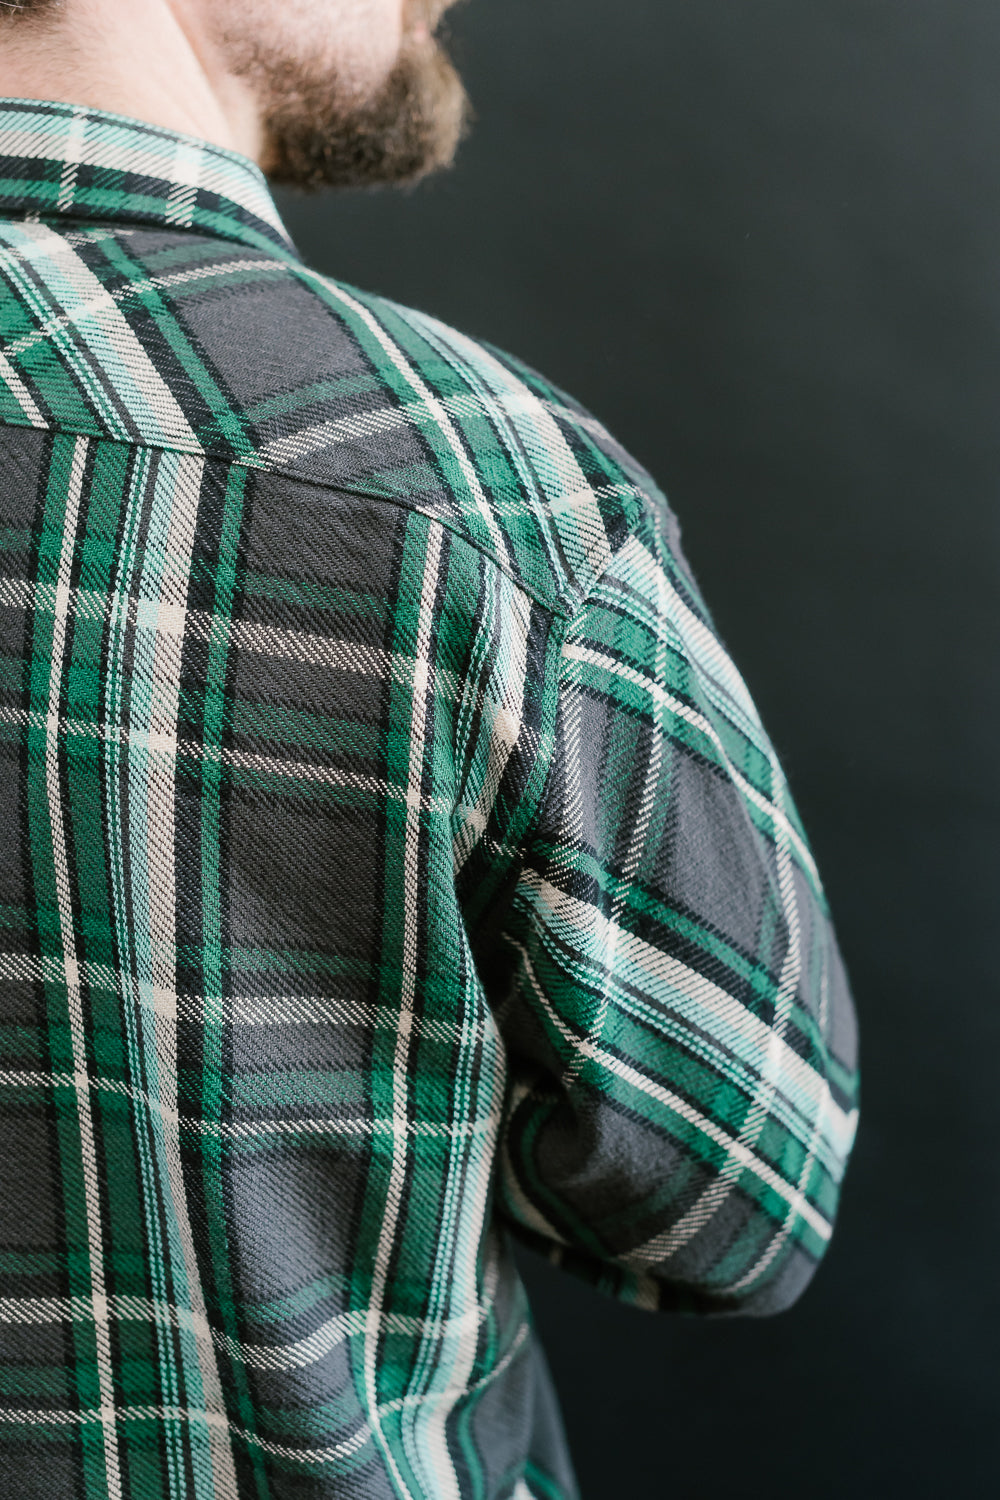 Bryson Check Flannel - Black, Green, White, Turquoise